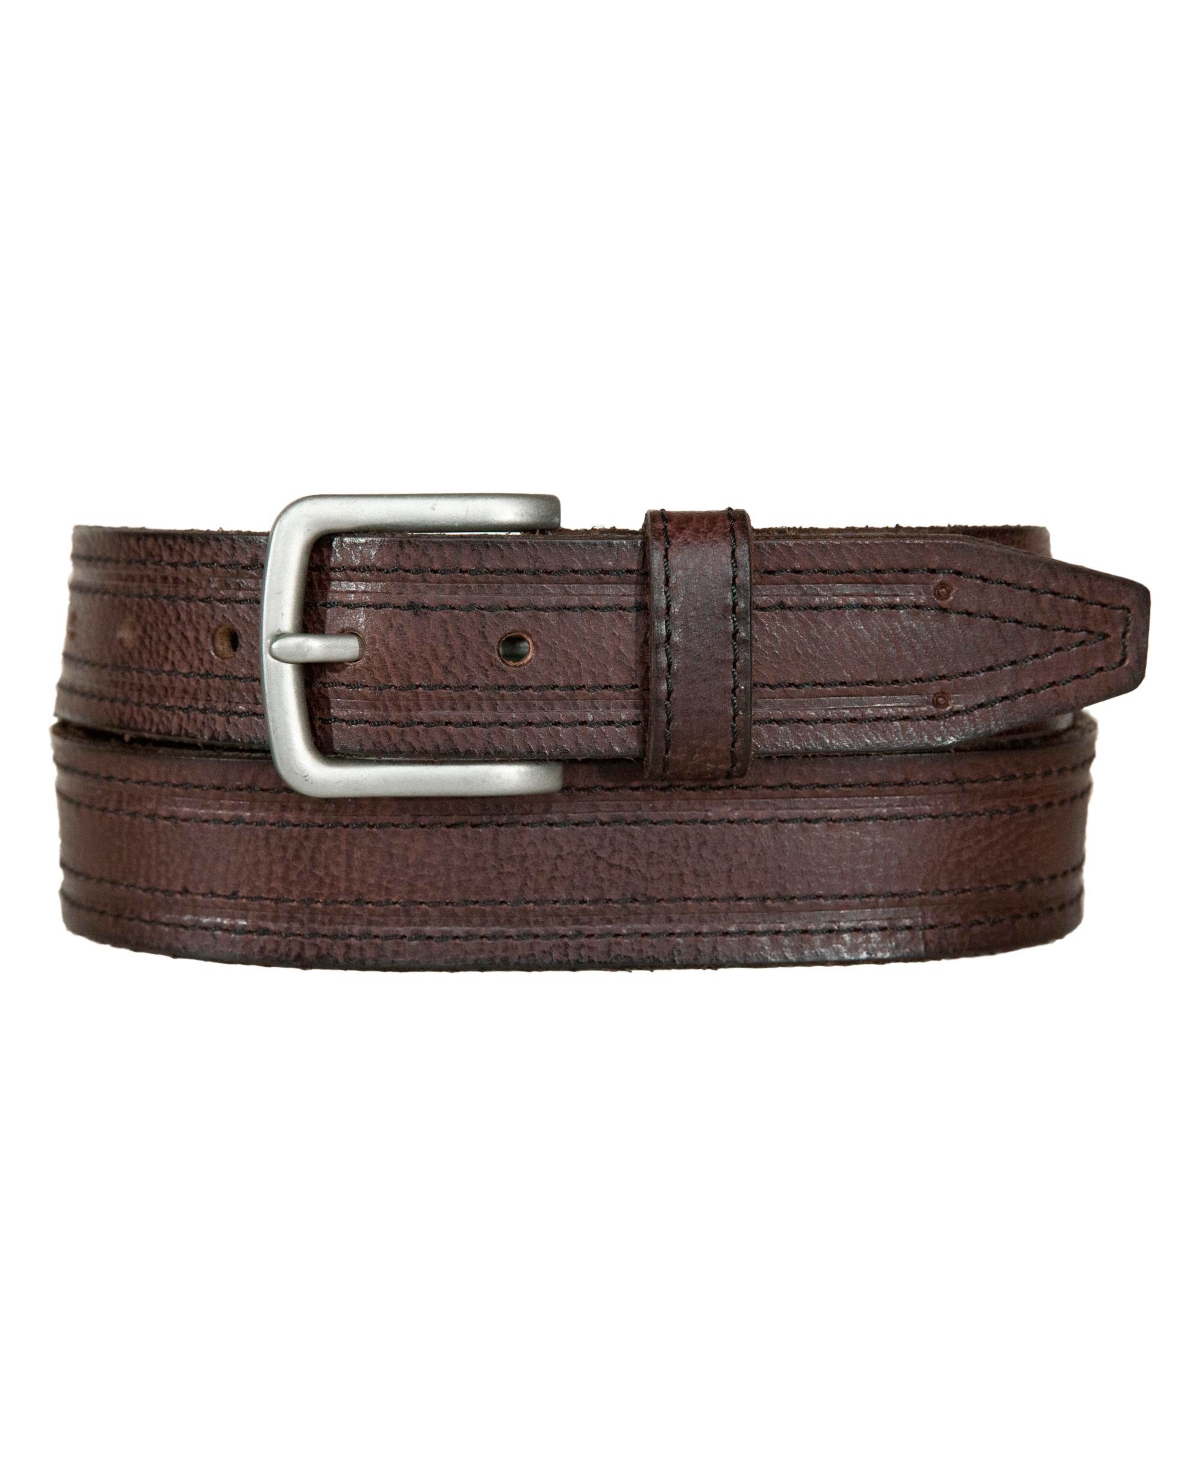 Men's Antique-Like Leather Belt with Darker Stitching Detail - Tan